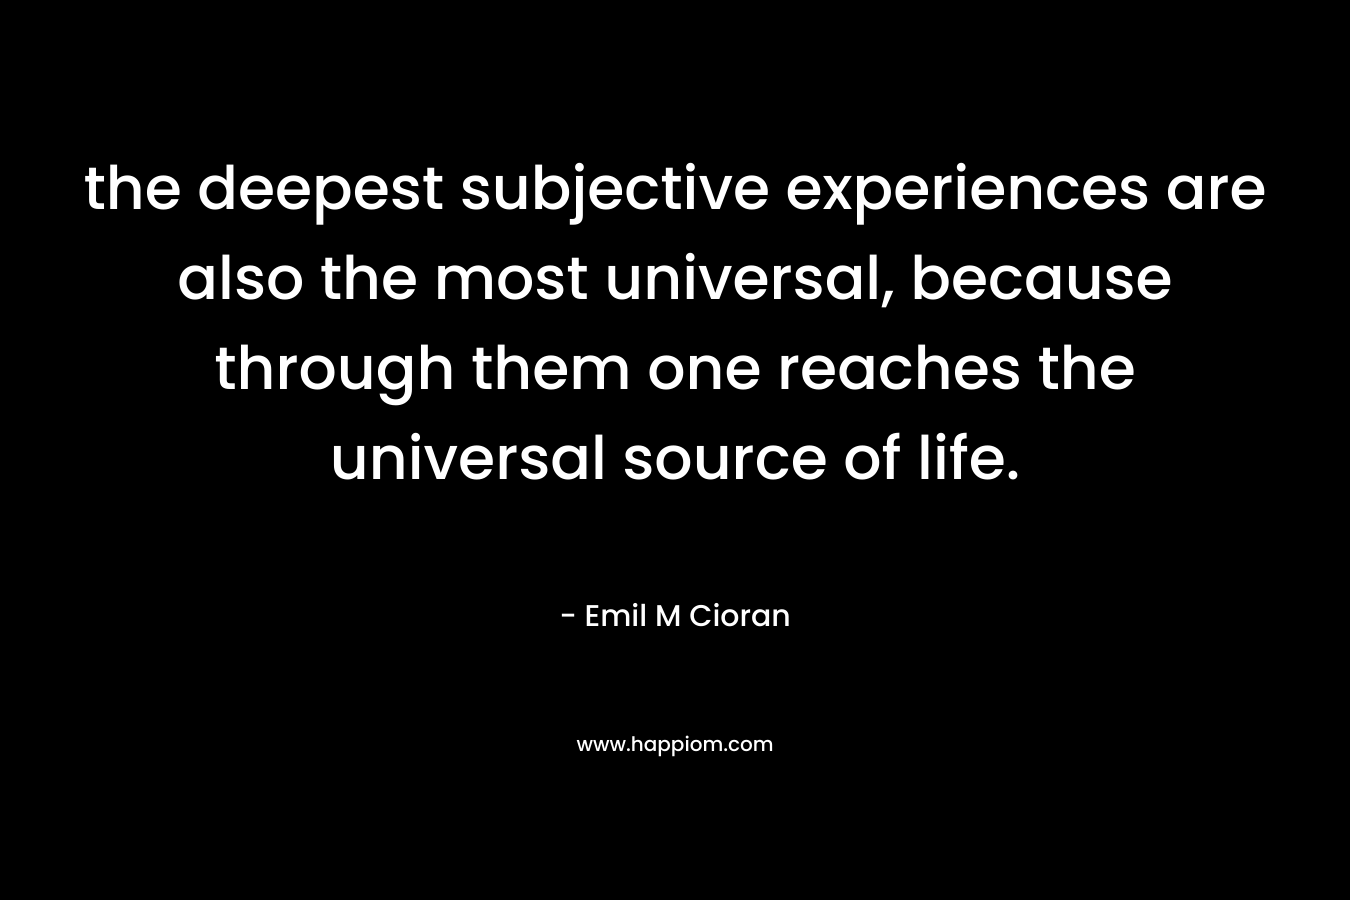 the deepest subjective experiences are also the most universal, because through them one reaches the universal source of life.